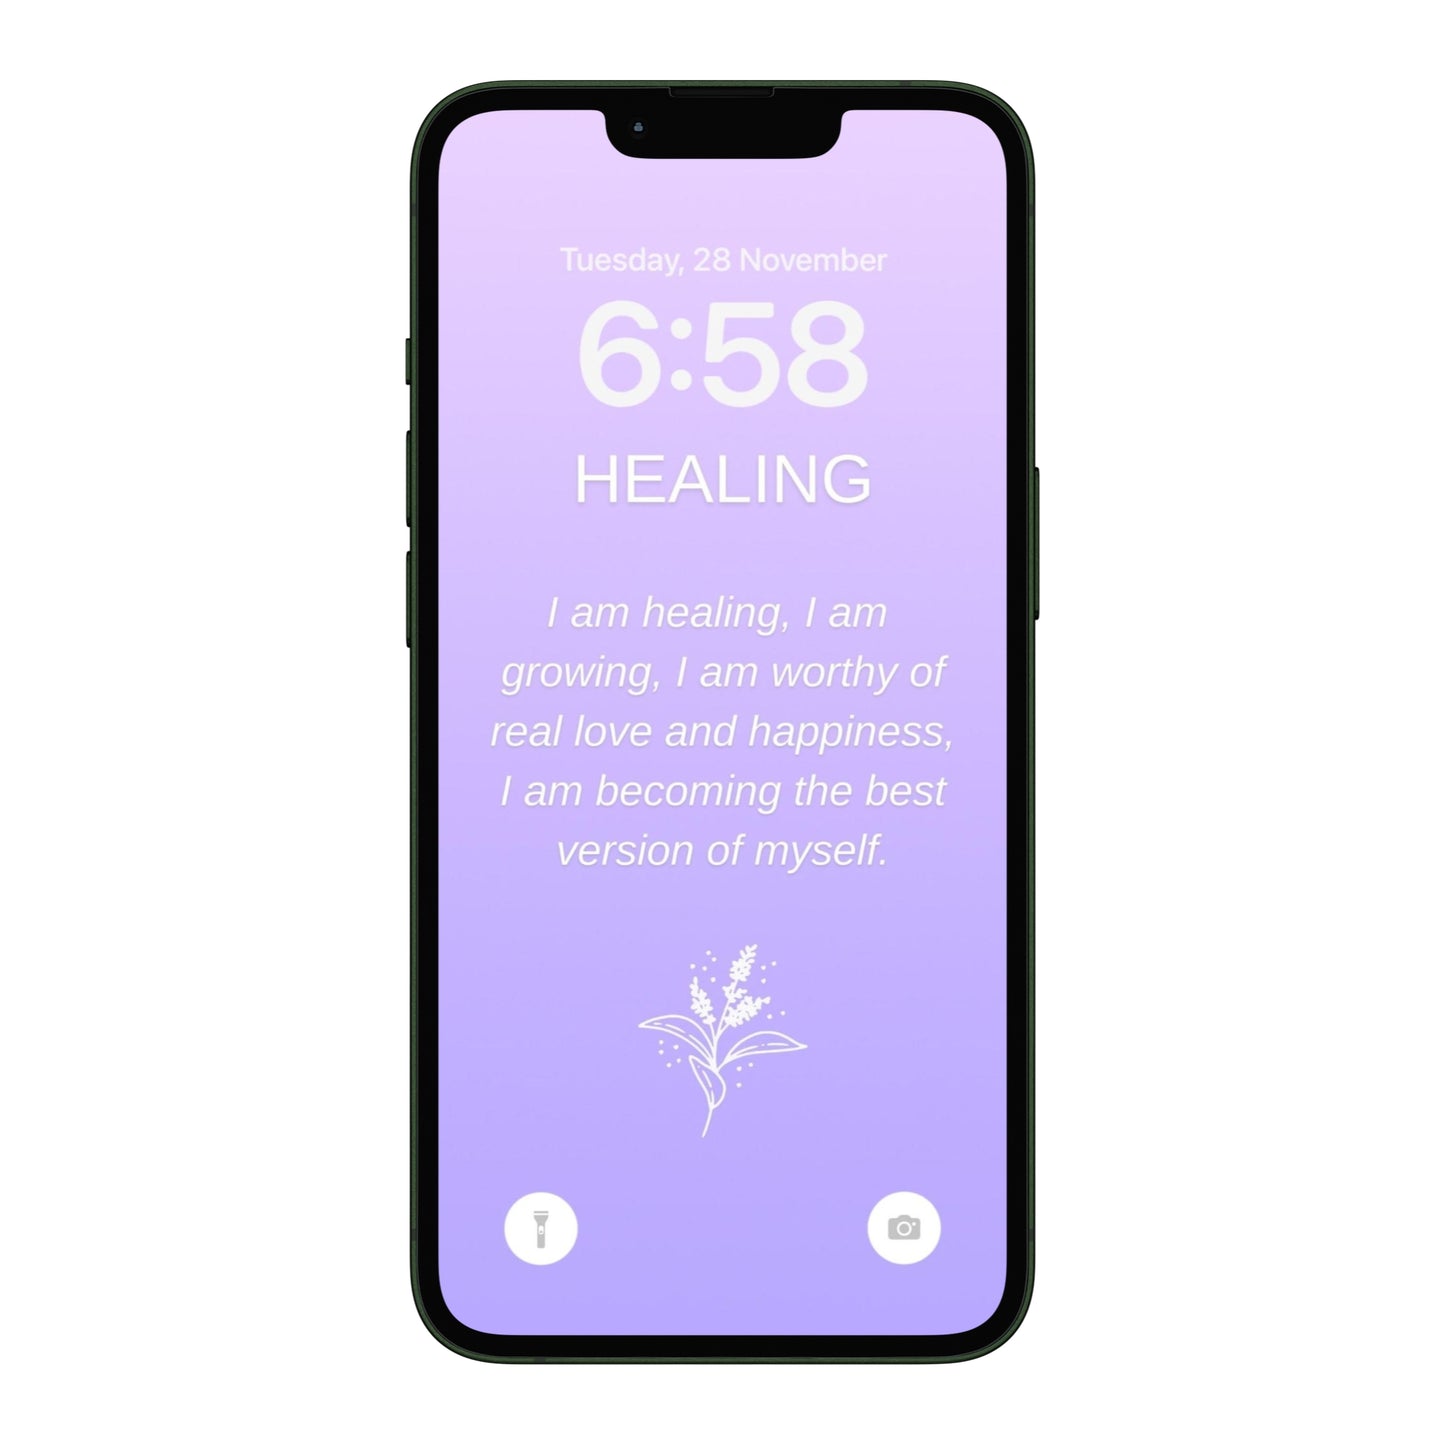 100 Affirmations Wallpapers For Your Phone - Lavender Edition